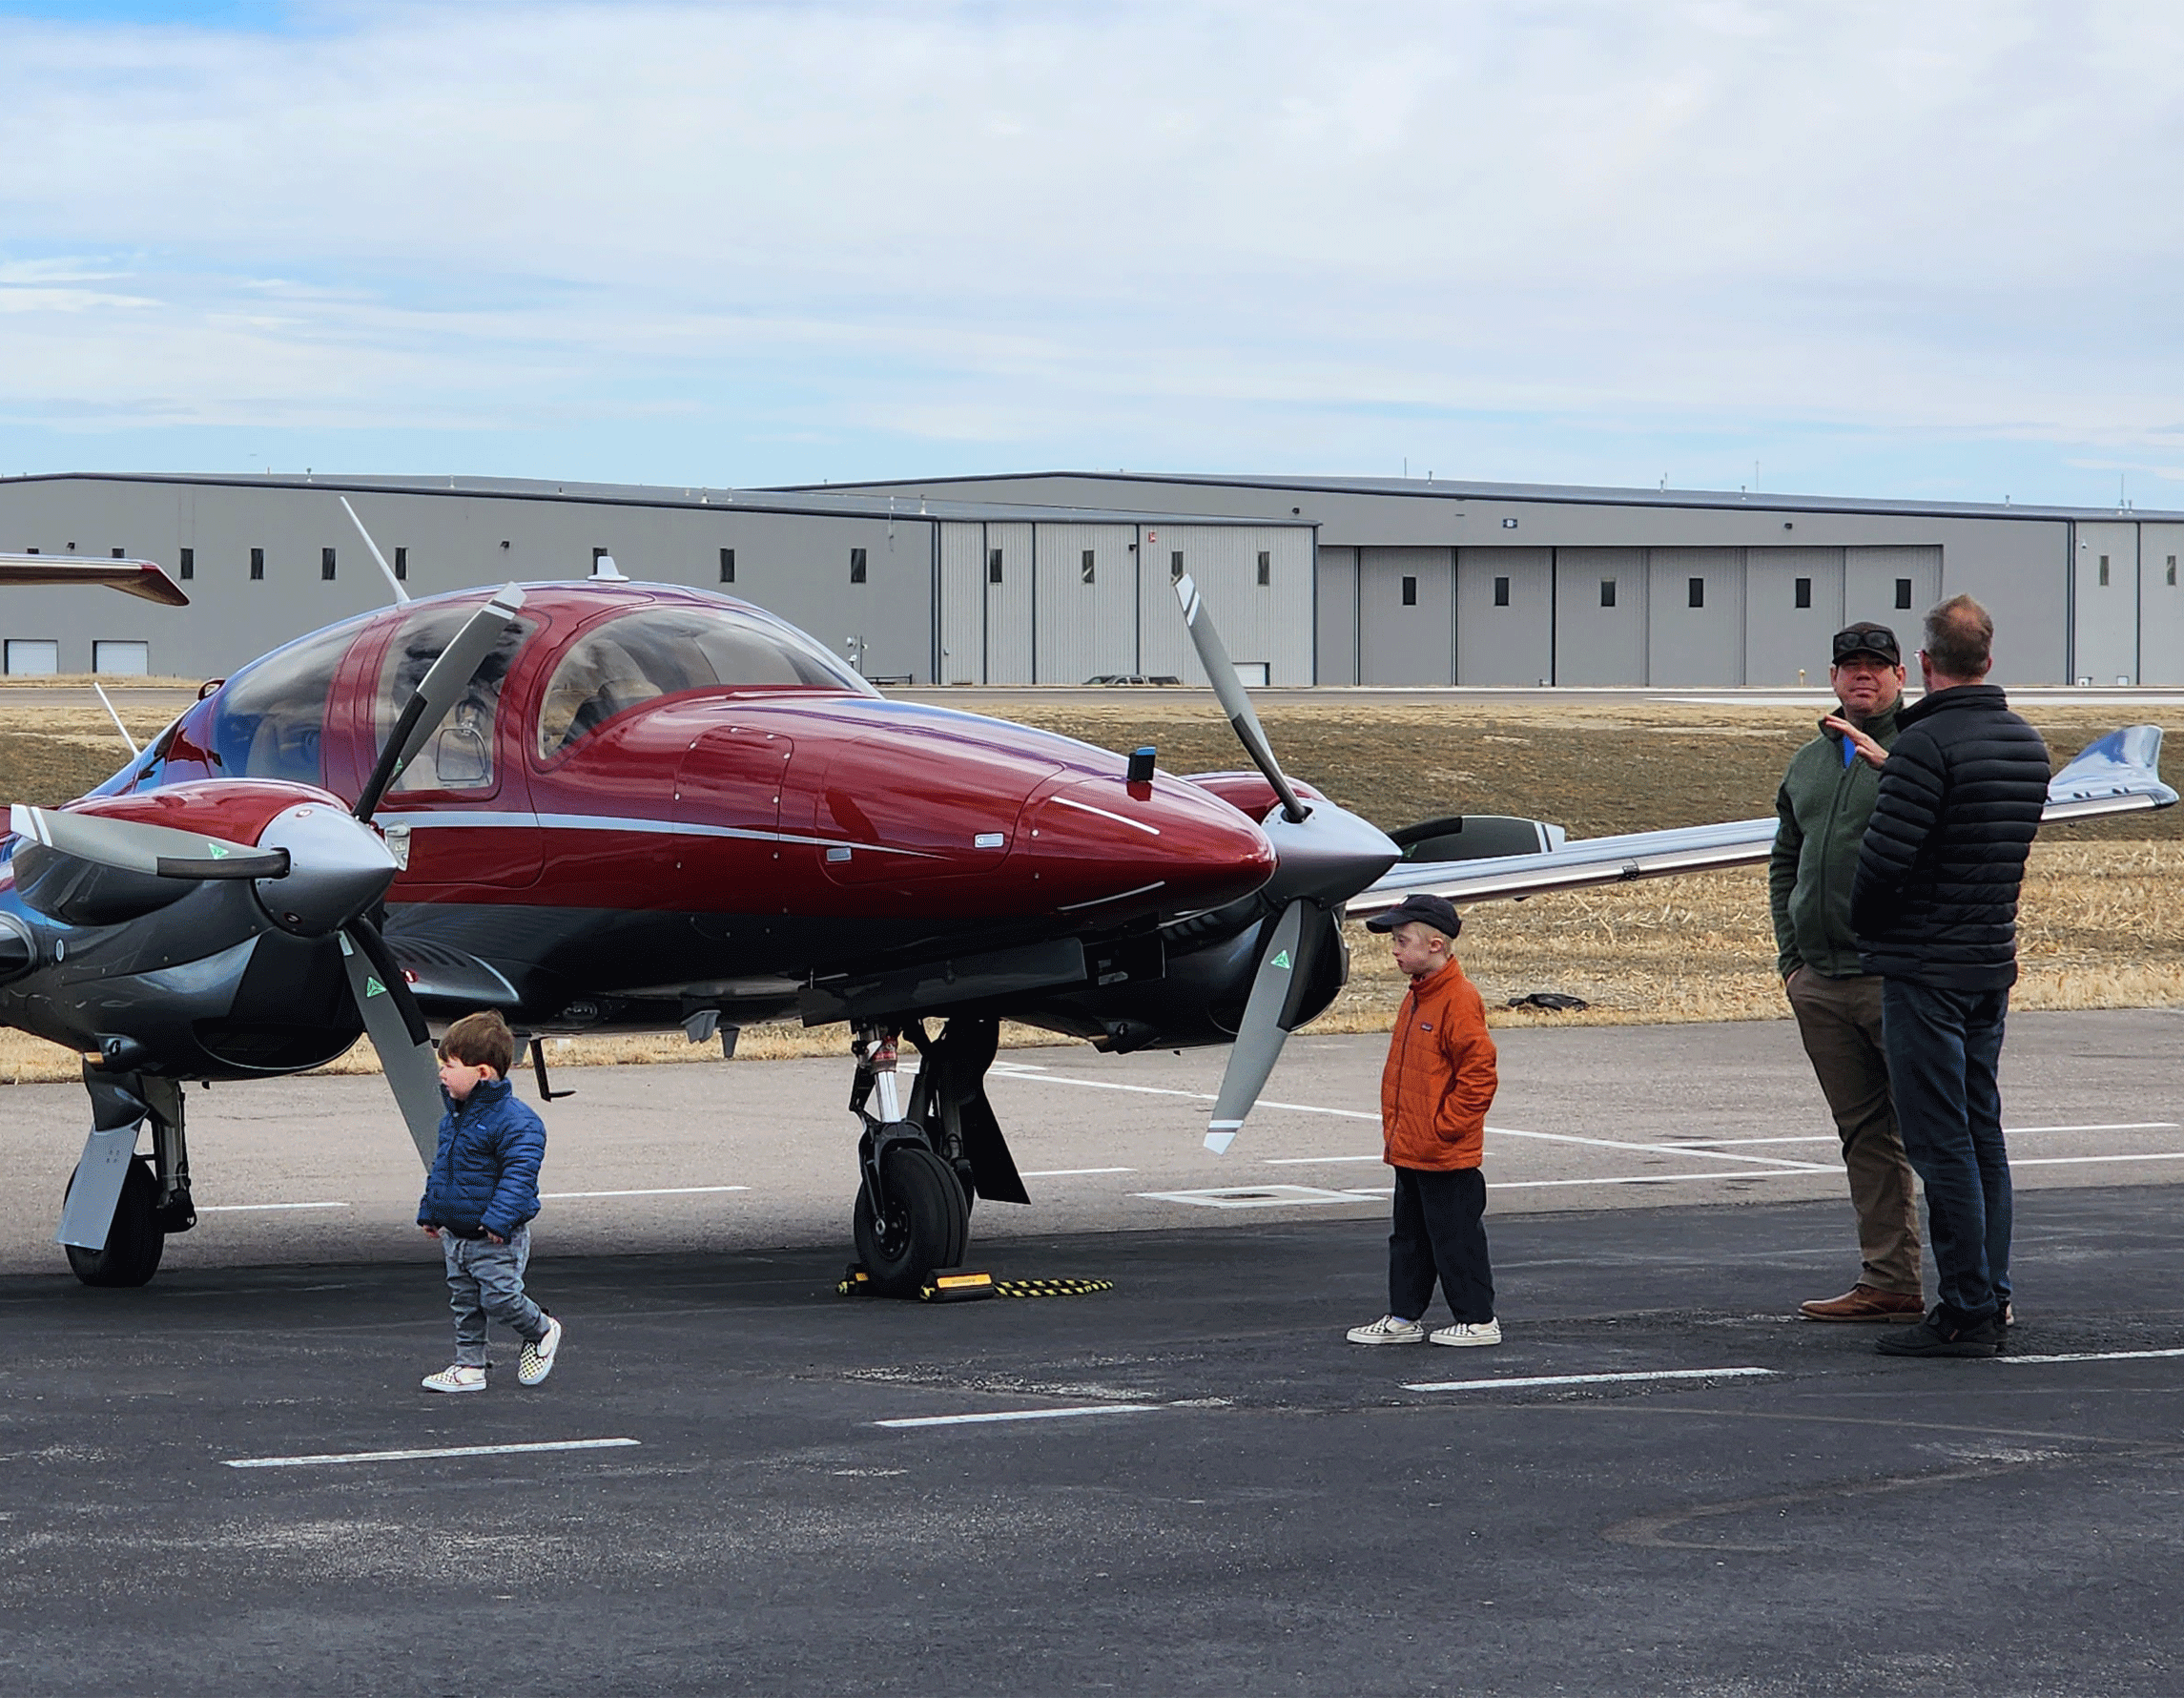 Adults and kids by airplane on the ramp